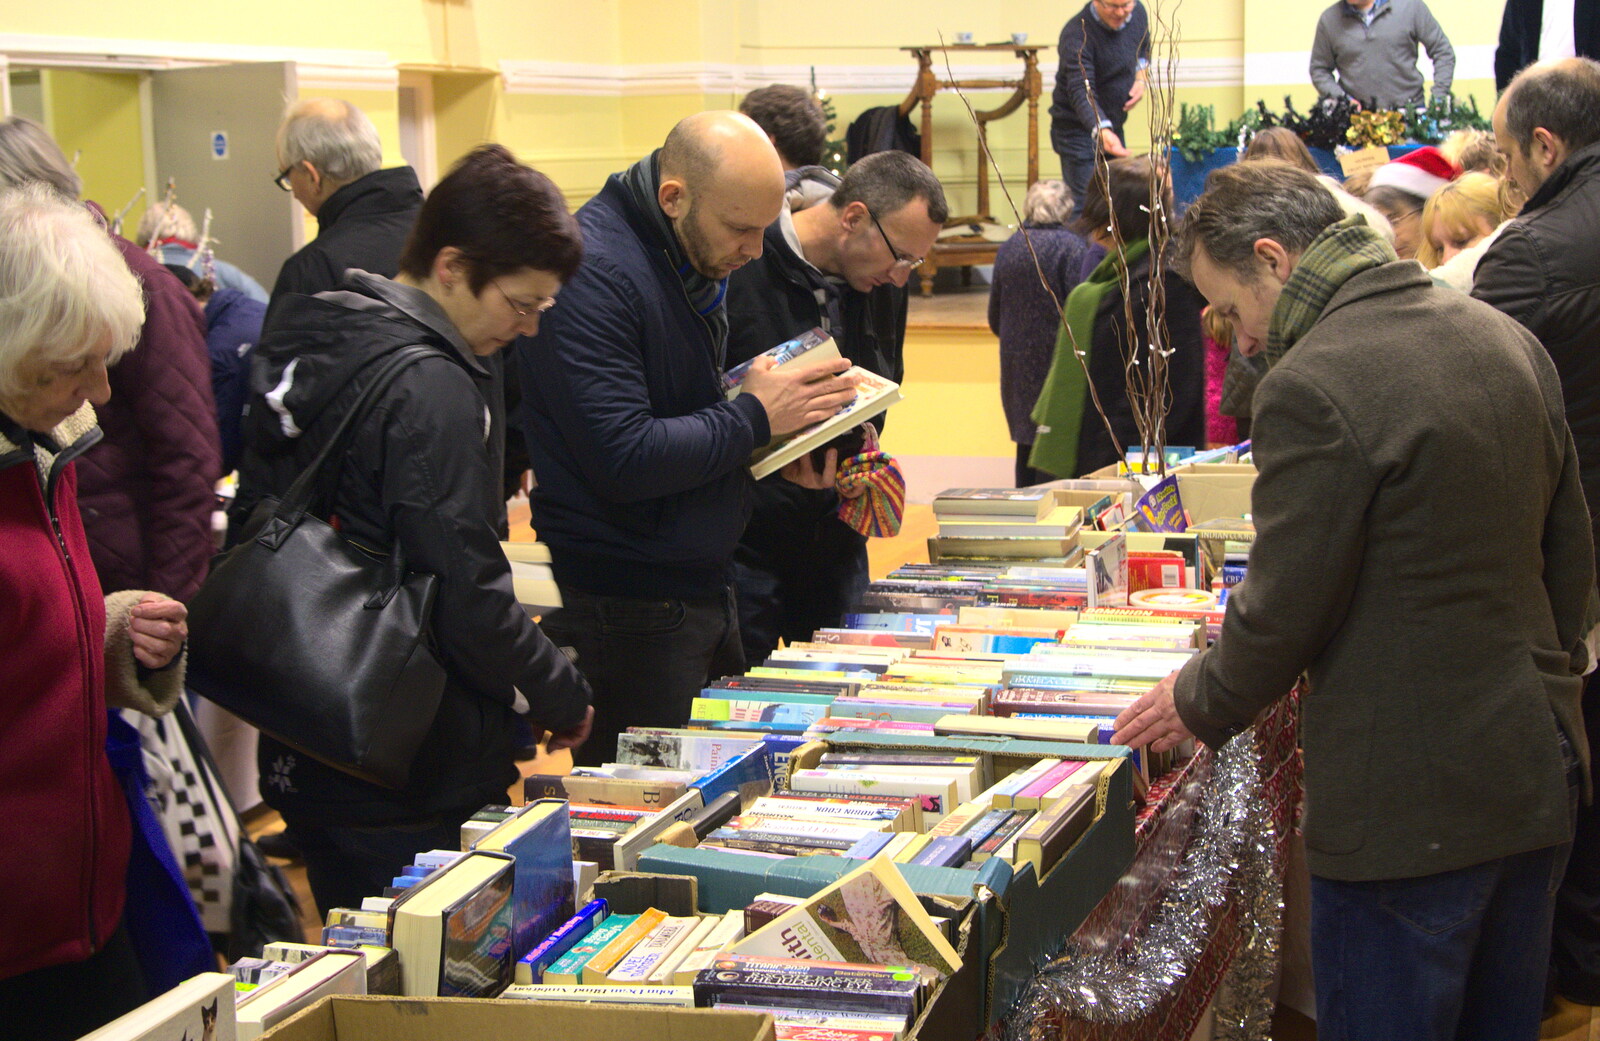 There's a book sale in the town hall from The Eye Christmas Lights, and a Trip to Norwich, Norfolk - 4th December 2015